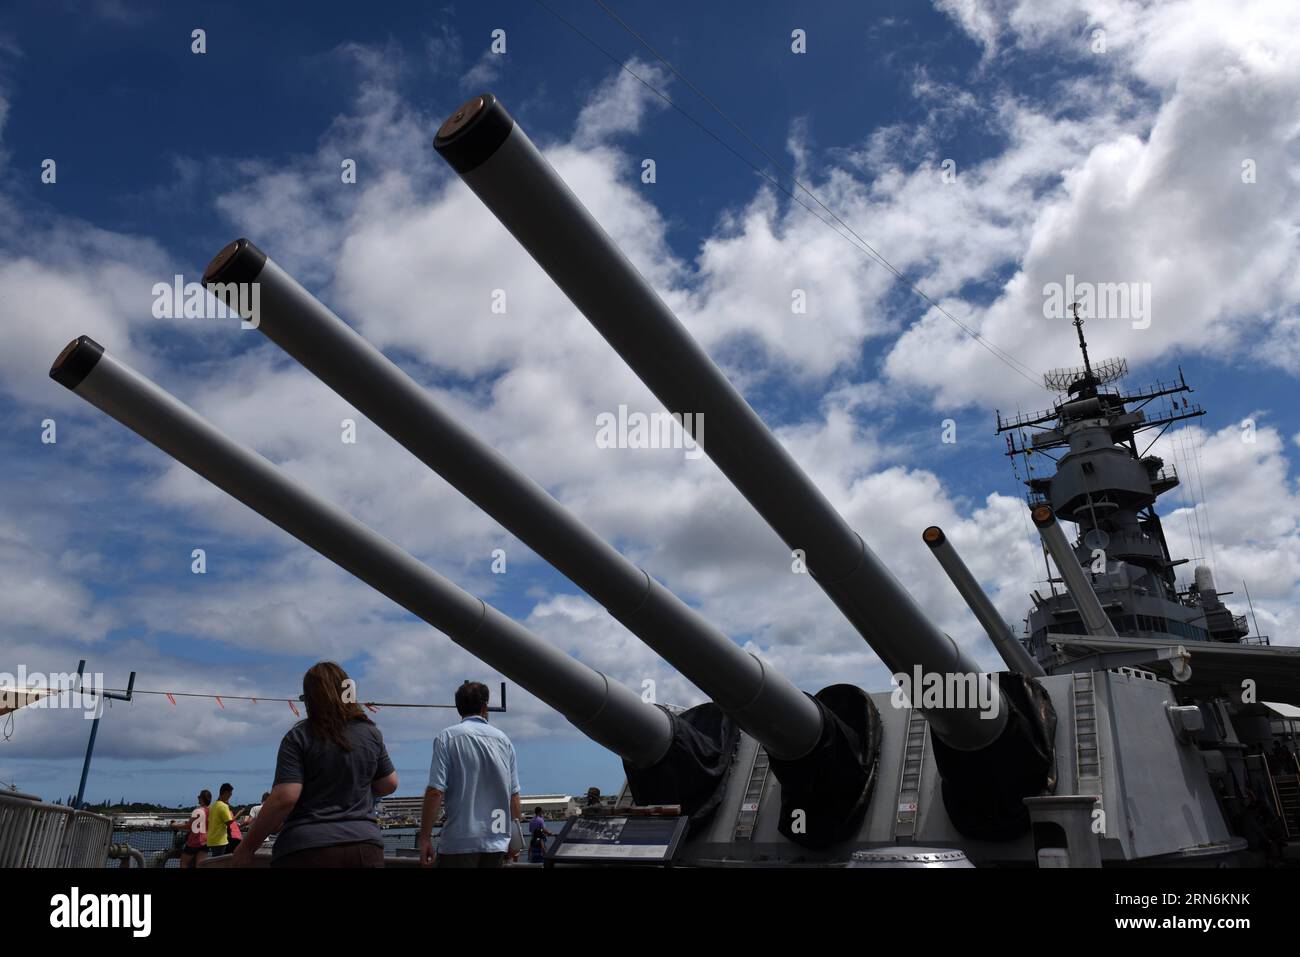 Tourists view USS Missouri (BB-63) in Honolulu, Hawaii, the United States, July 30, 2015. USS Missouri (BB-63) was the site where Japan signed the surrender documents at the end of the World War II. In 1998, this battleship was donated to the USS Missouri Memorial Association and became a museum ship at Pearl Harbor, Hawaii. ) US-HAWAII-USS MISSOURI-MUSEUM SHIP-VISIT YinxBogu PUBLICATIONxNOTxINxCHN   tourists View USS Missouri BB 63 in Honolulu Hawaii The United States July 30 2015 USS Missouri BB 63 what The Site Where Japan signed The Surrender Documents AT The End of The World was II in 199 Stock Photo